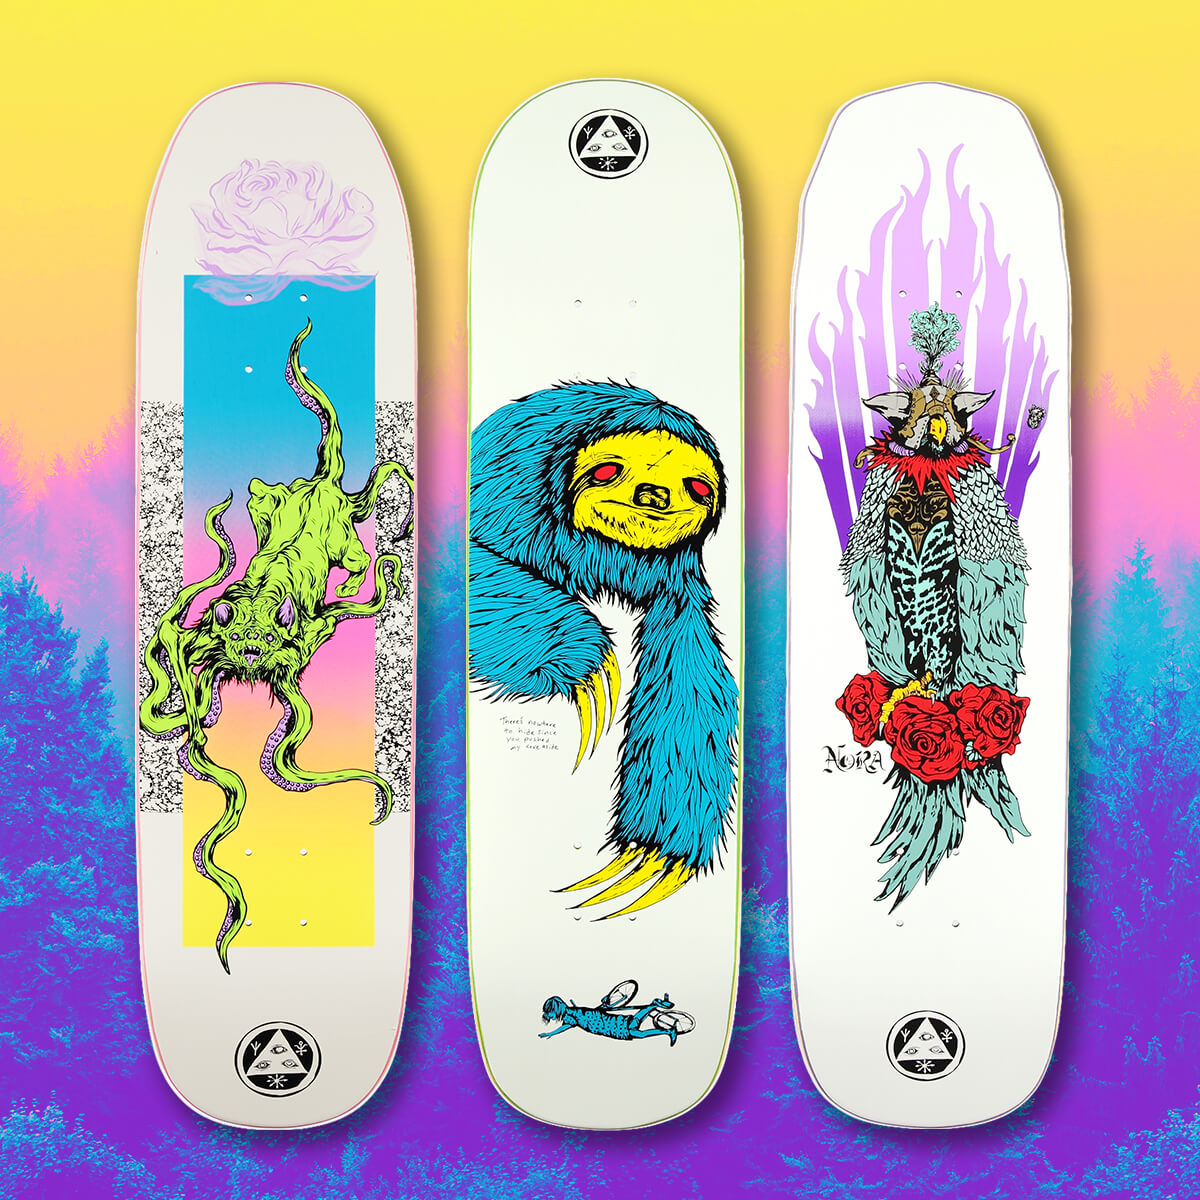 NEW ARRIVAL SKATEBOARDS FROM WELCOME AND MORE - SHOP NEW SKATE